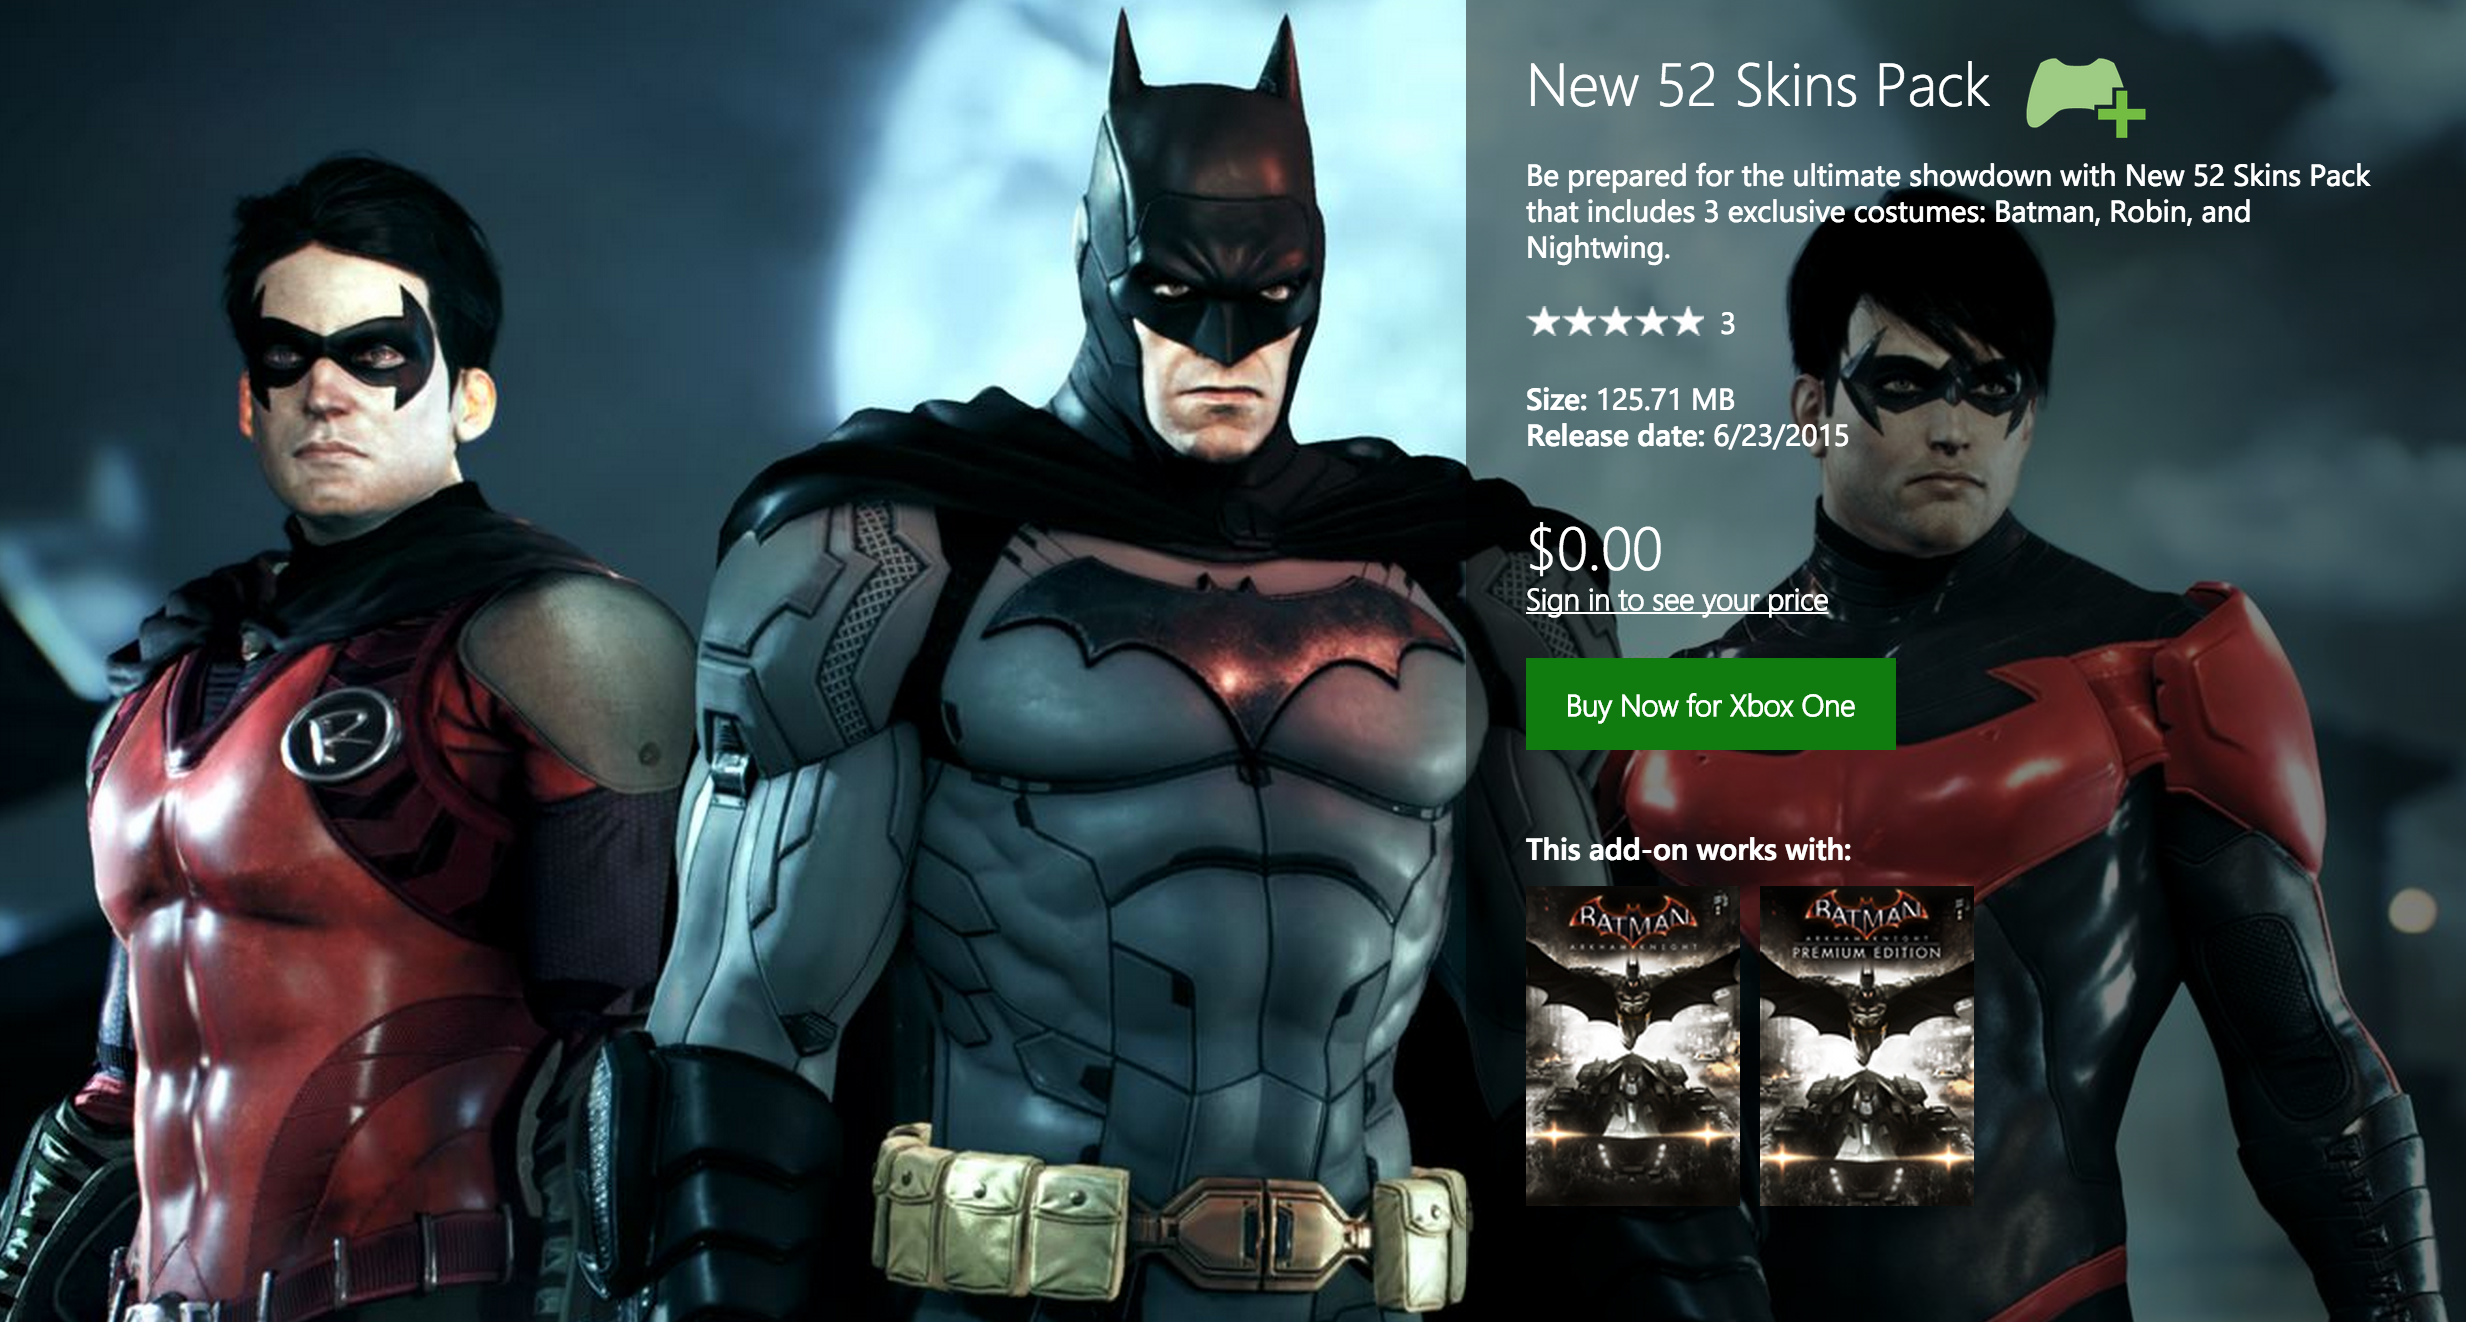 Games/Apps: Batman Arkham Knight 20% off + free skins & discounted bundle,  Watch Dogs $10, iOS freebies, more